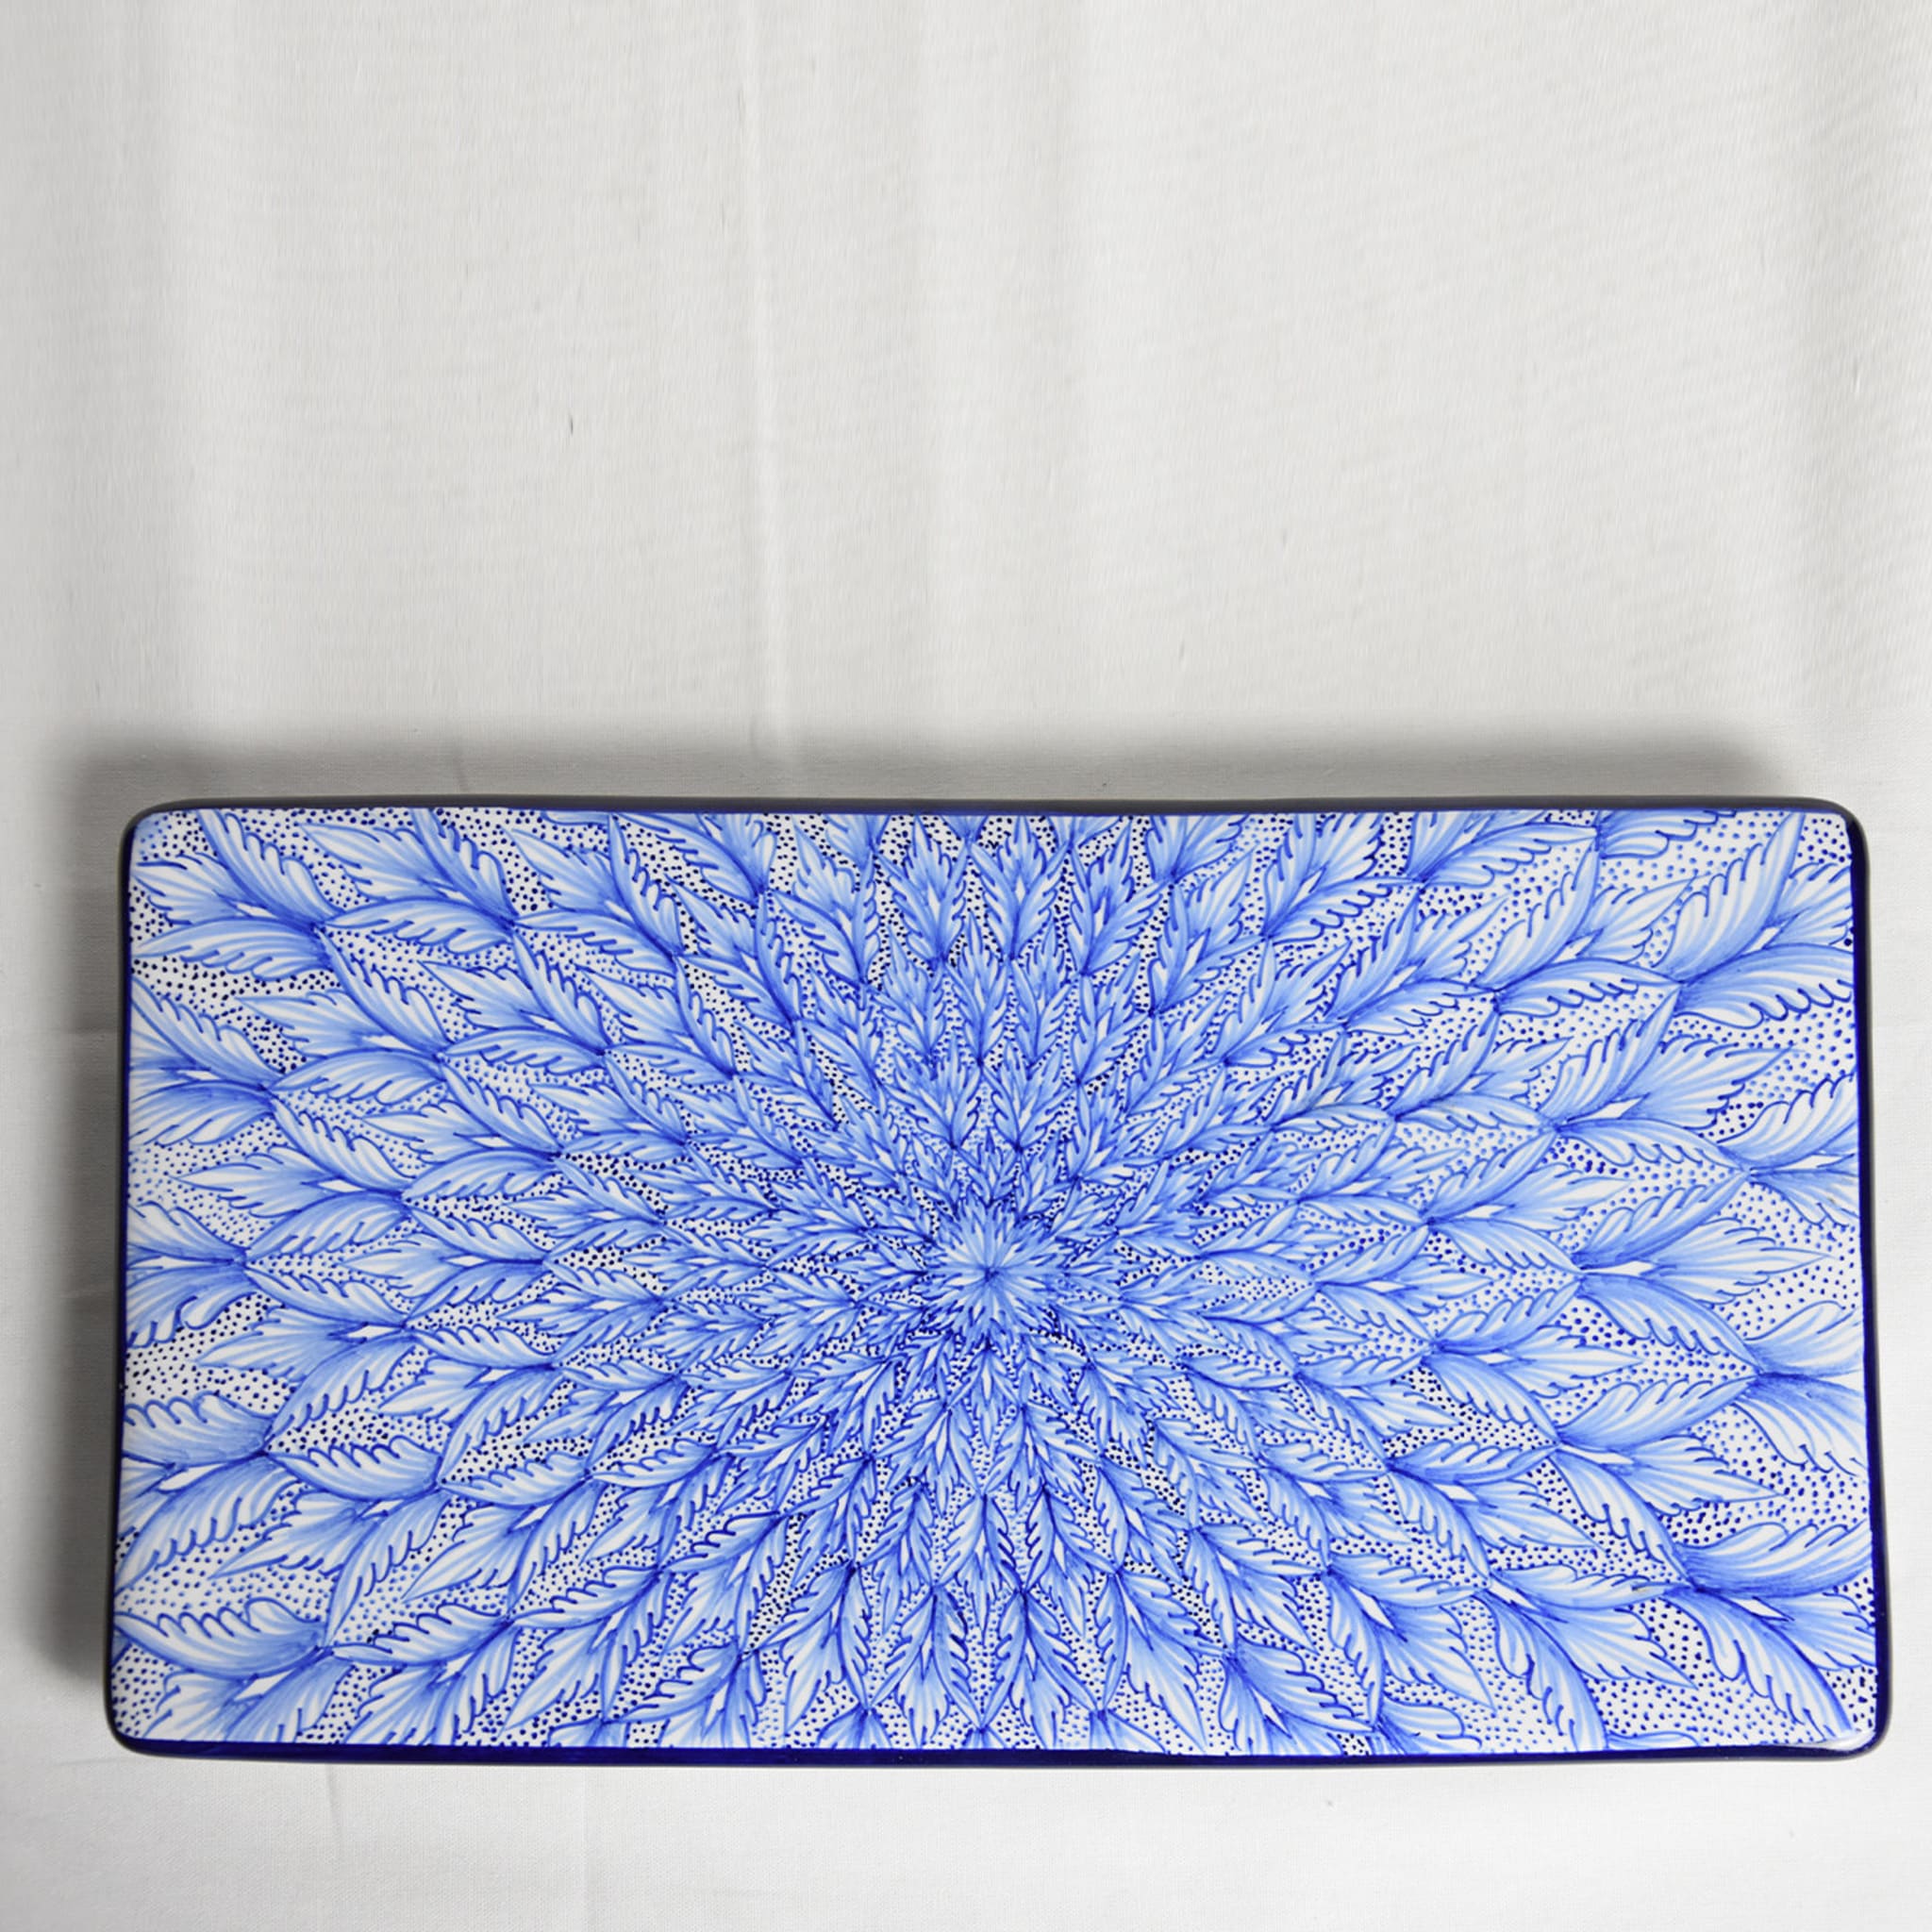 Peacock Feathers Rectangular Tray  - Alternative view 1